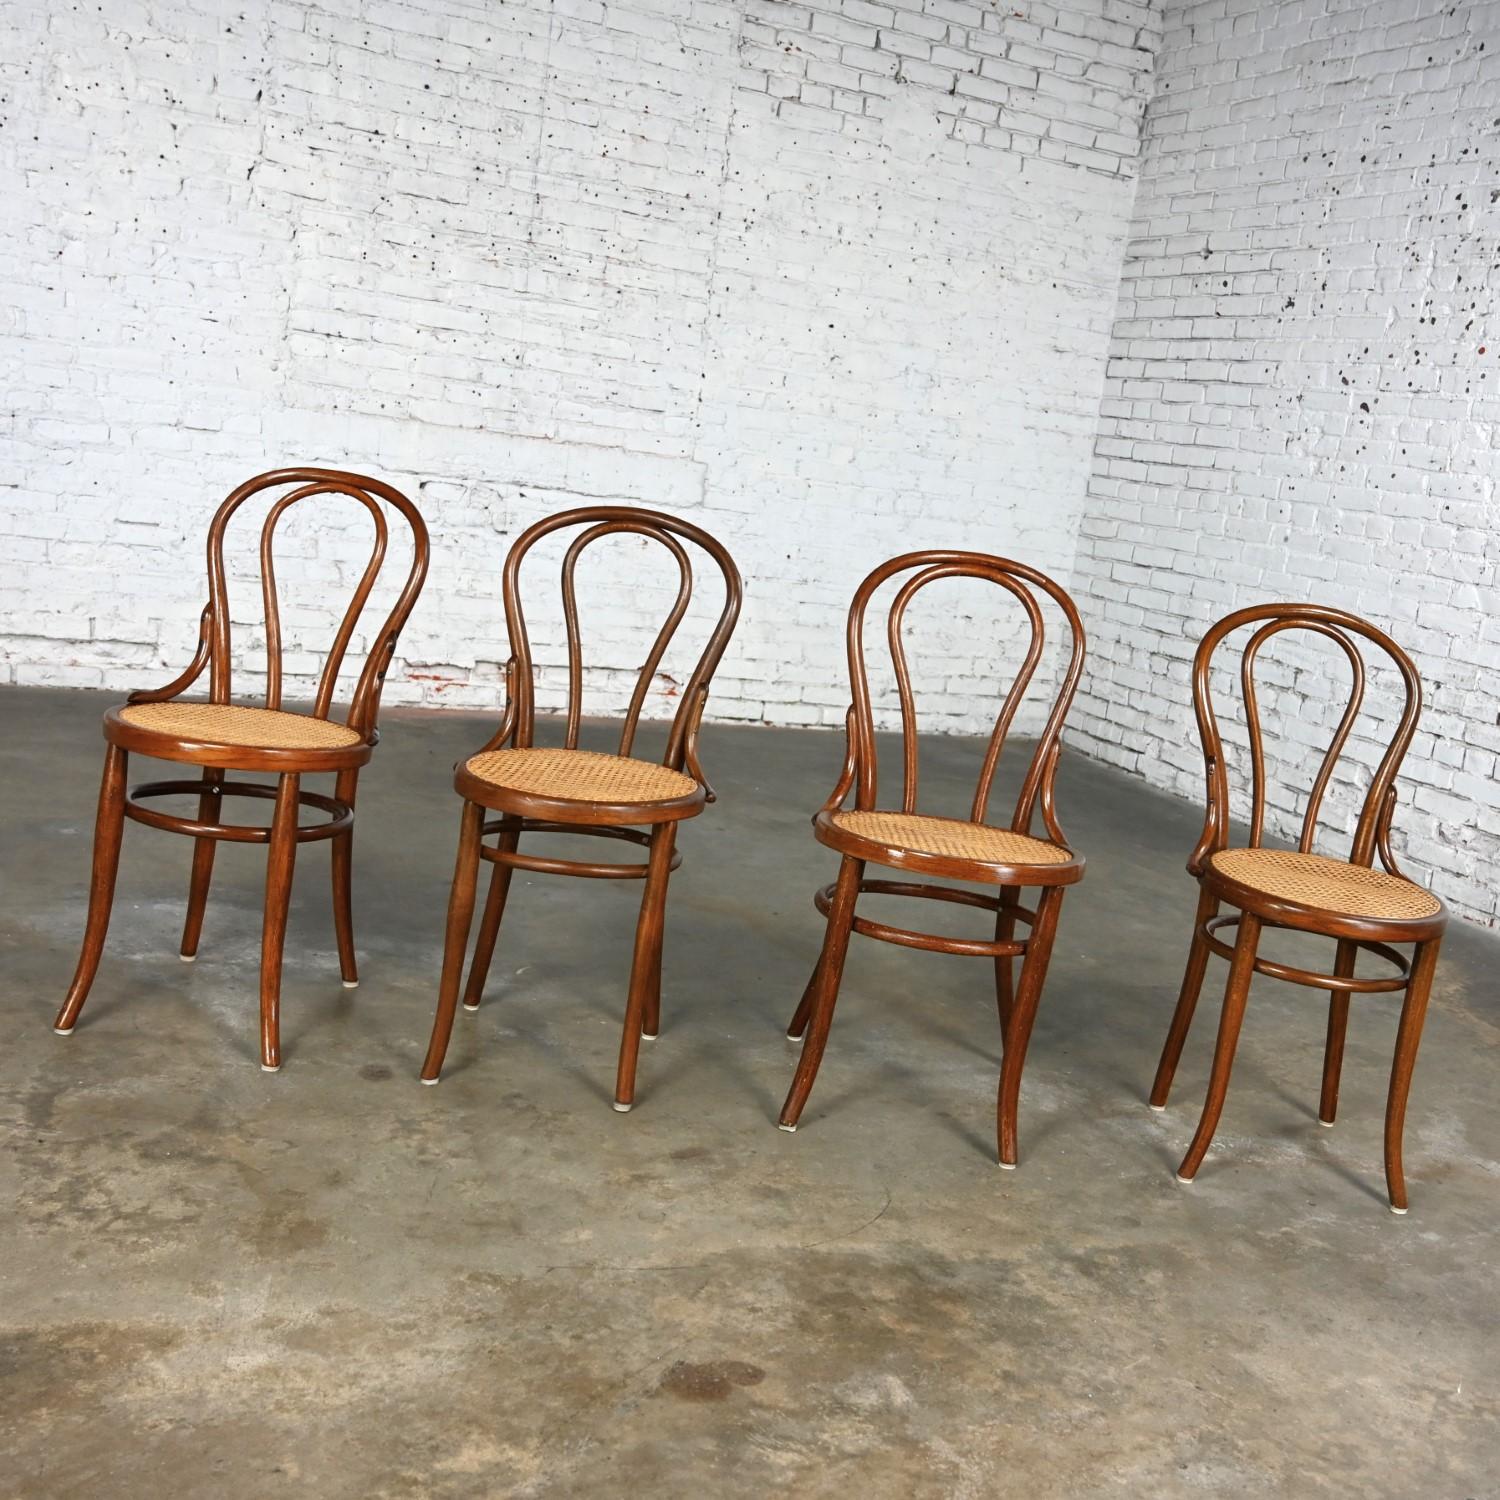 20th Century Set 4 Bauhaus Style #18 Café Chairs by Thonet Bentwood Frames & Hand Caned Seats